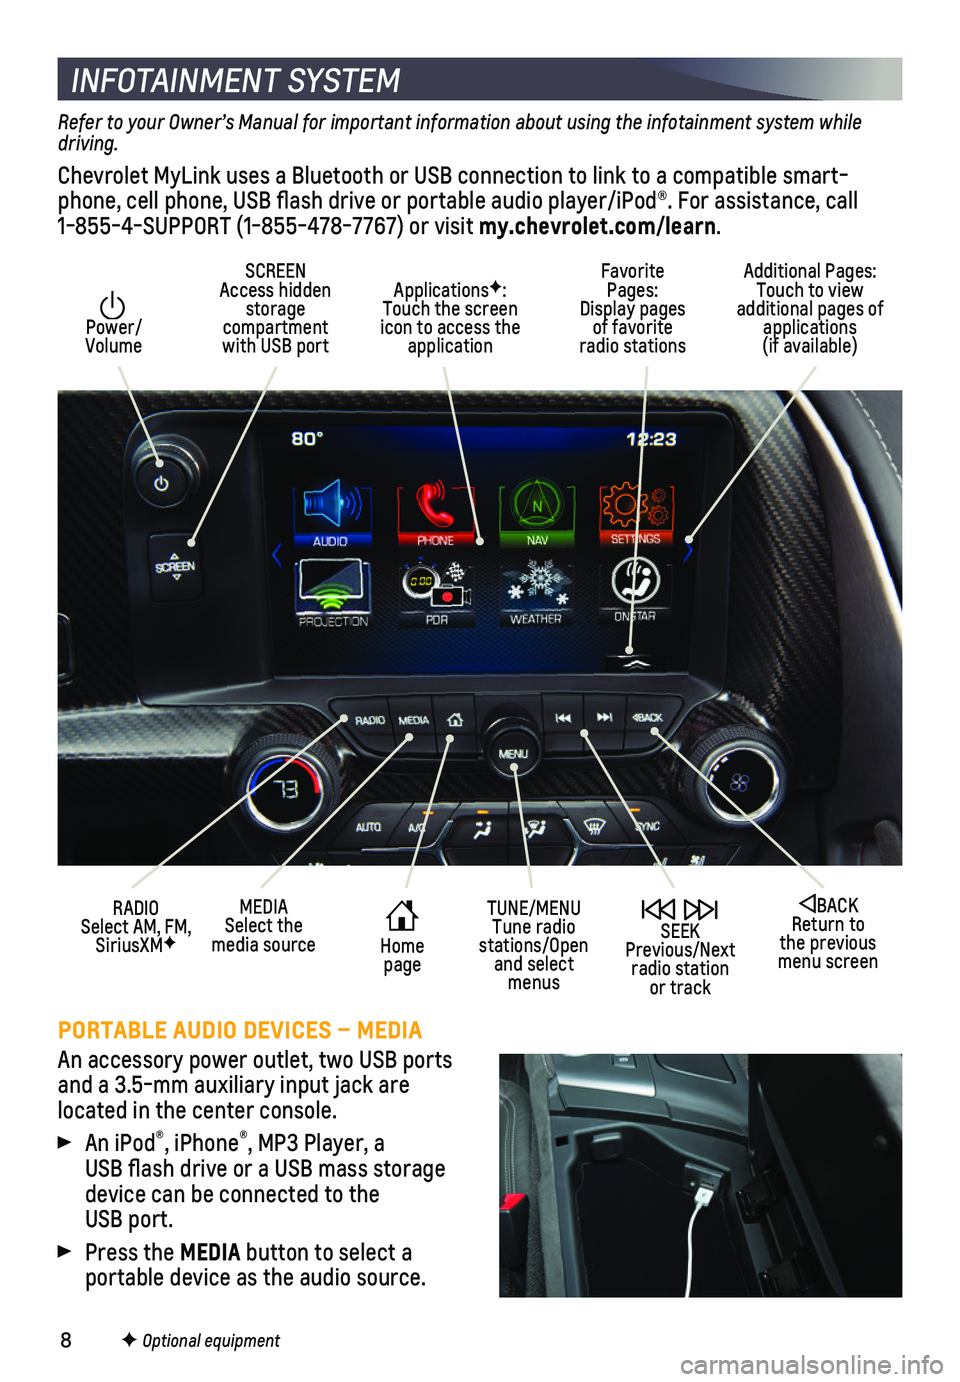 CHEVROLET CORVETTE 2018  Get To Know Guide 8
INFOTAINMENT SYSTEM
 Power/ Volume
Additional Pages: Touch to view additional pages of applications  (if available)
SCREEN Access hidden storage compartment with USB port
ApplicationsF: Touch the sc